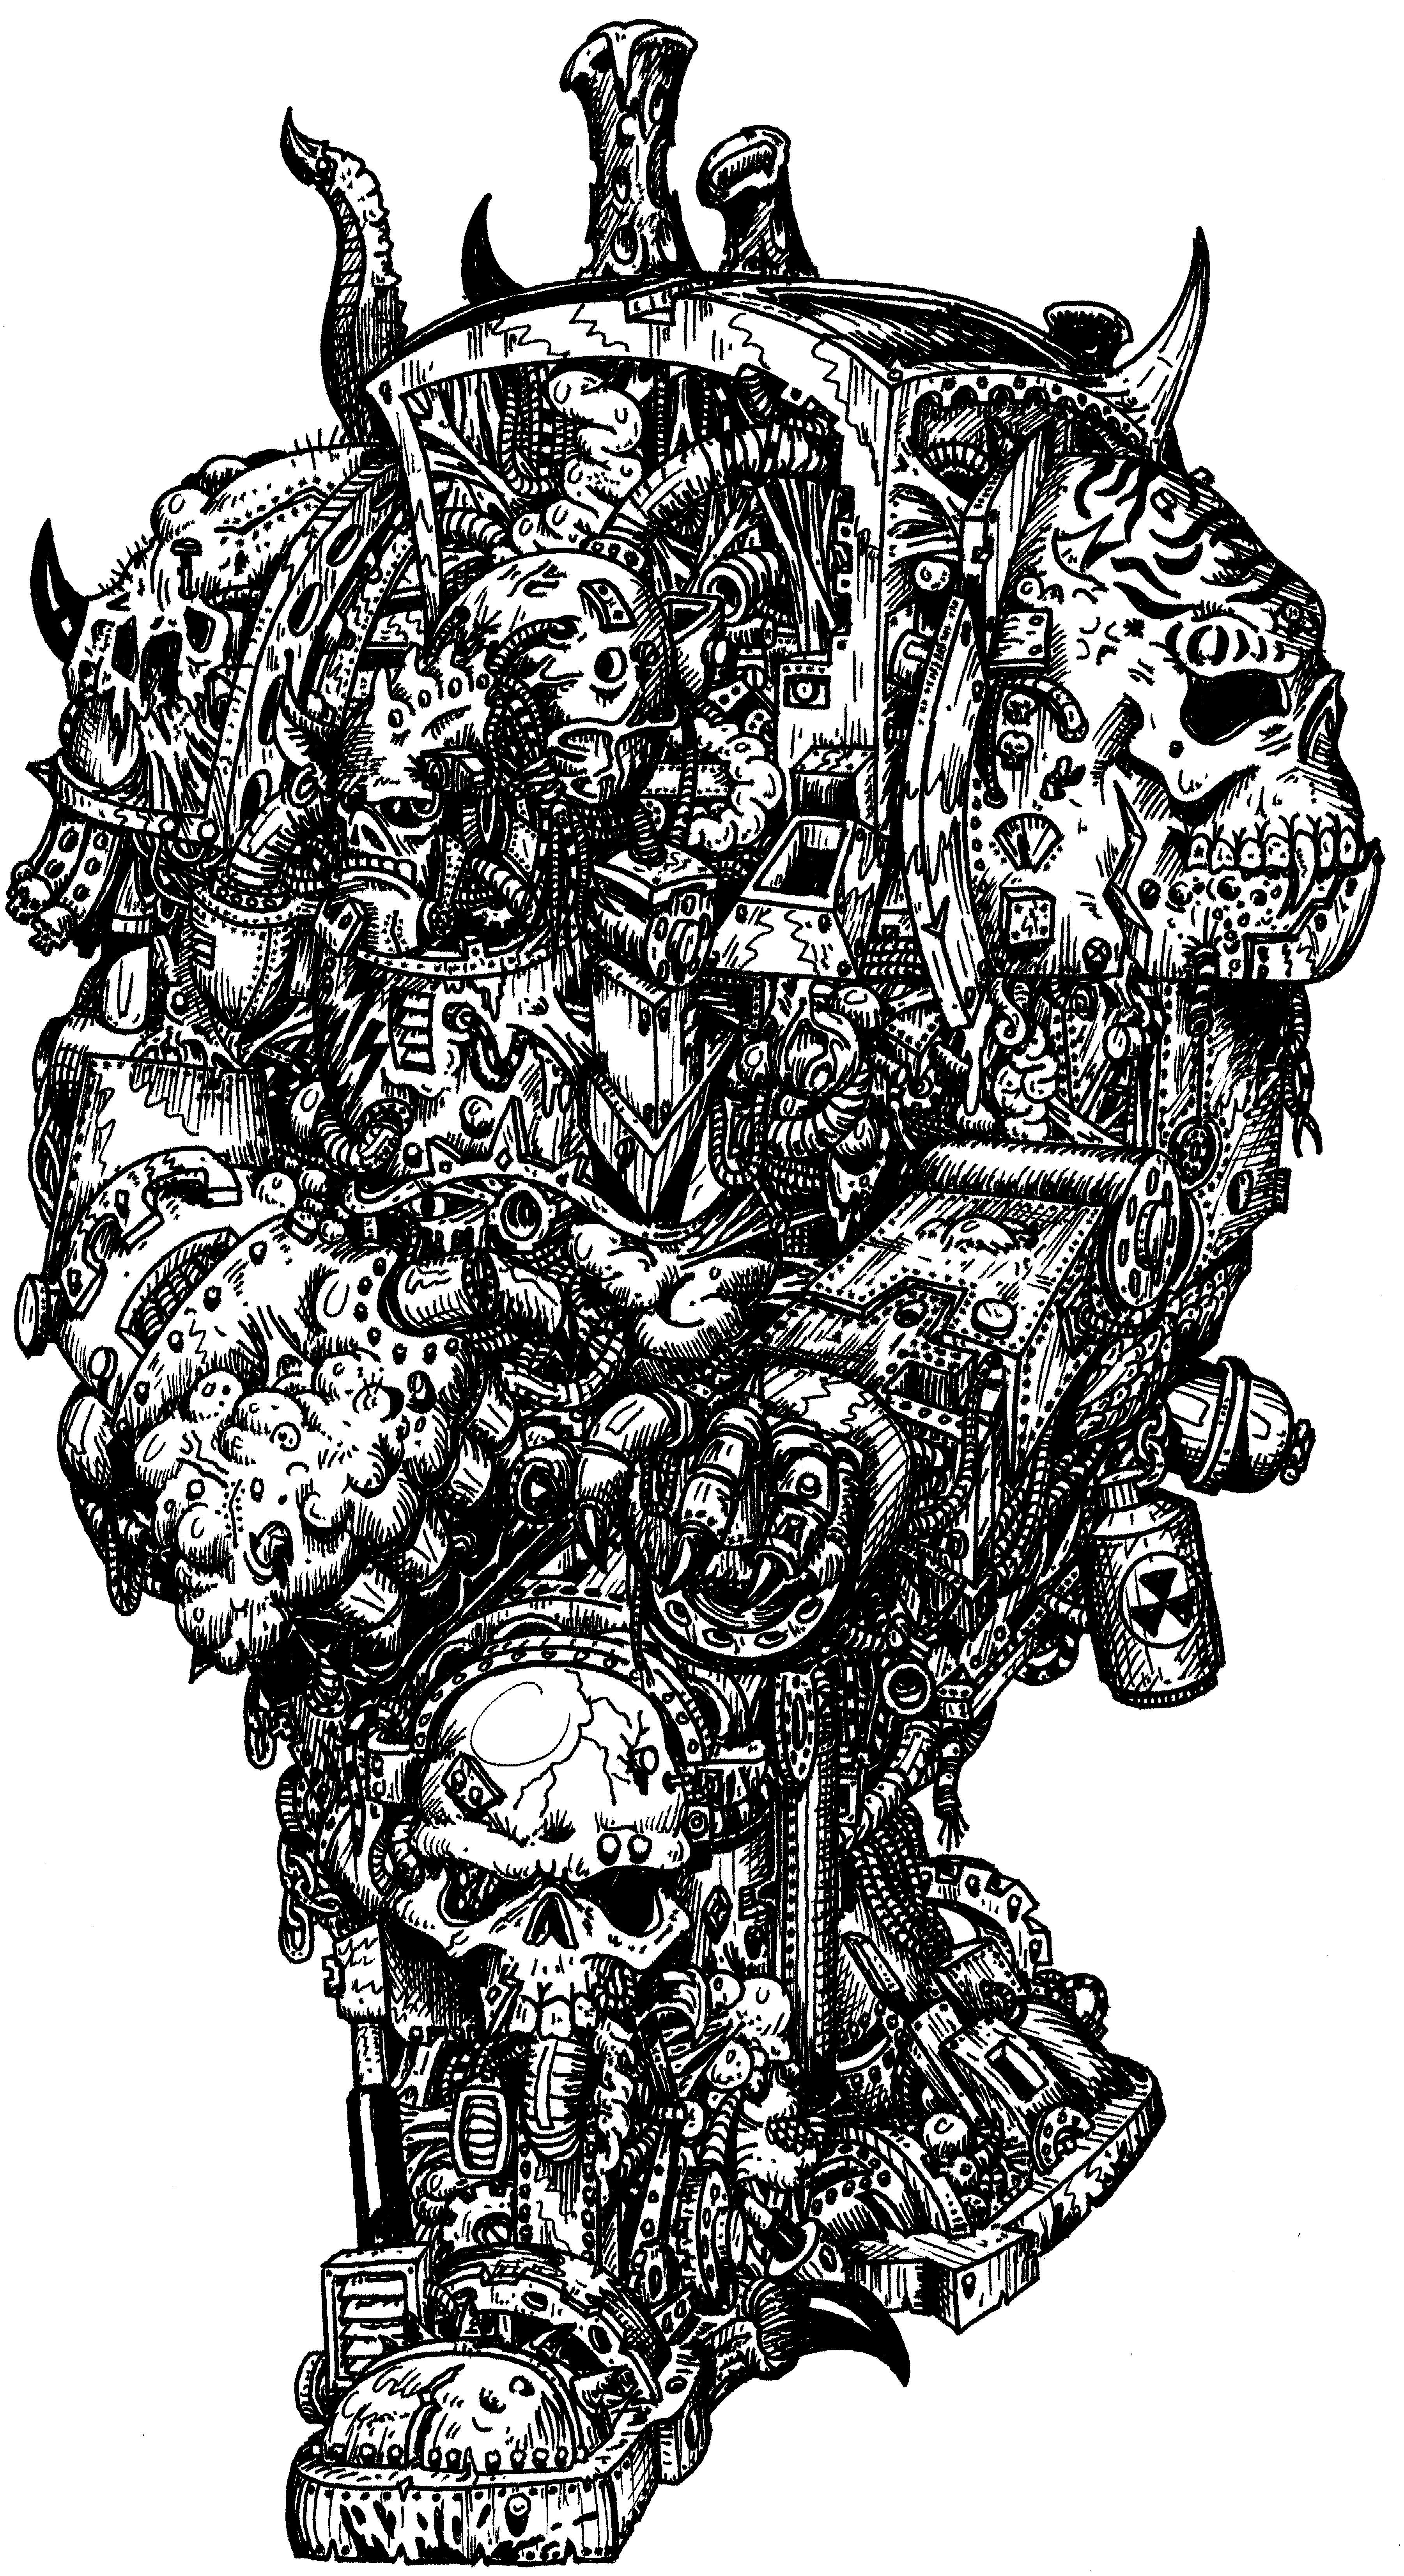 Artwork, Bizar, Black, Chaos, Chaos Space Marines, Drawing, Ghost, Mushrooms, Old, School, Style, White